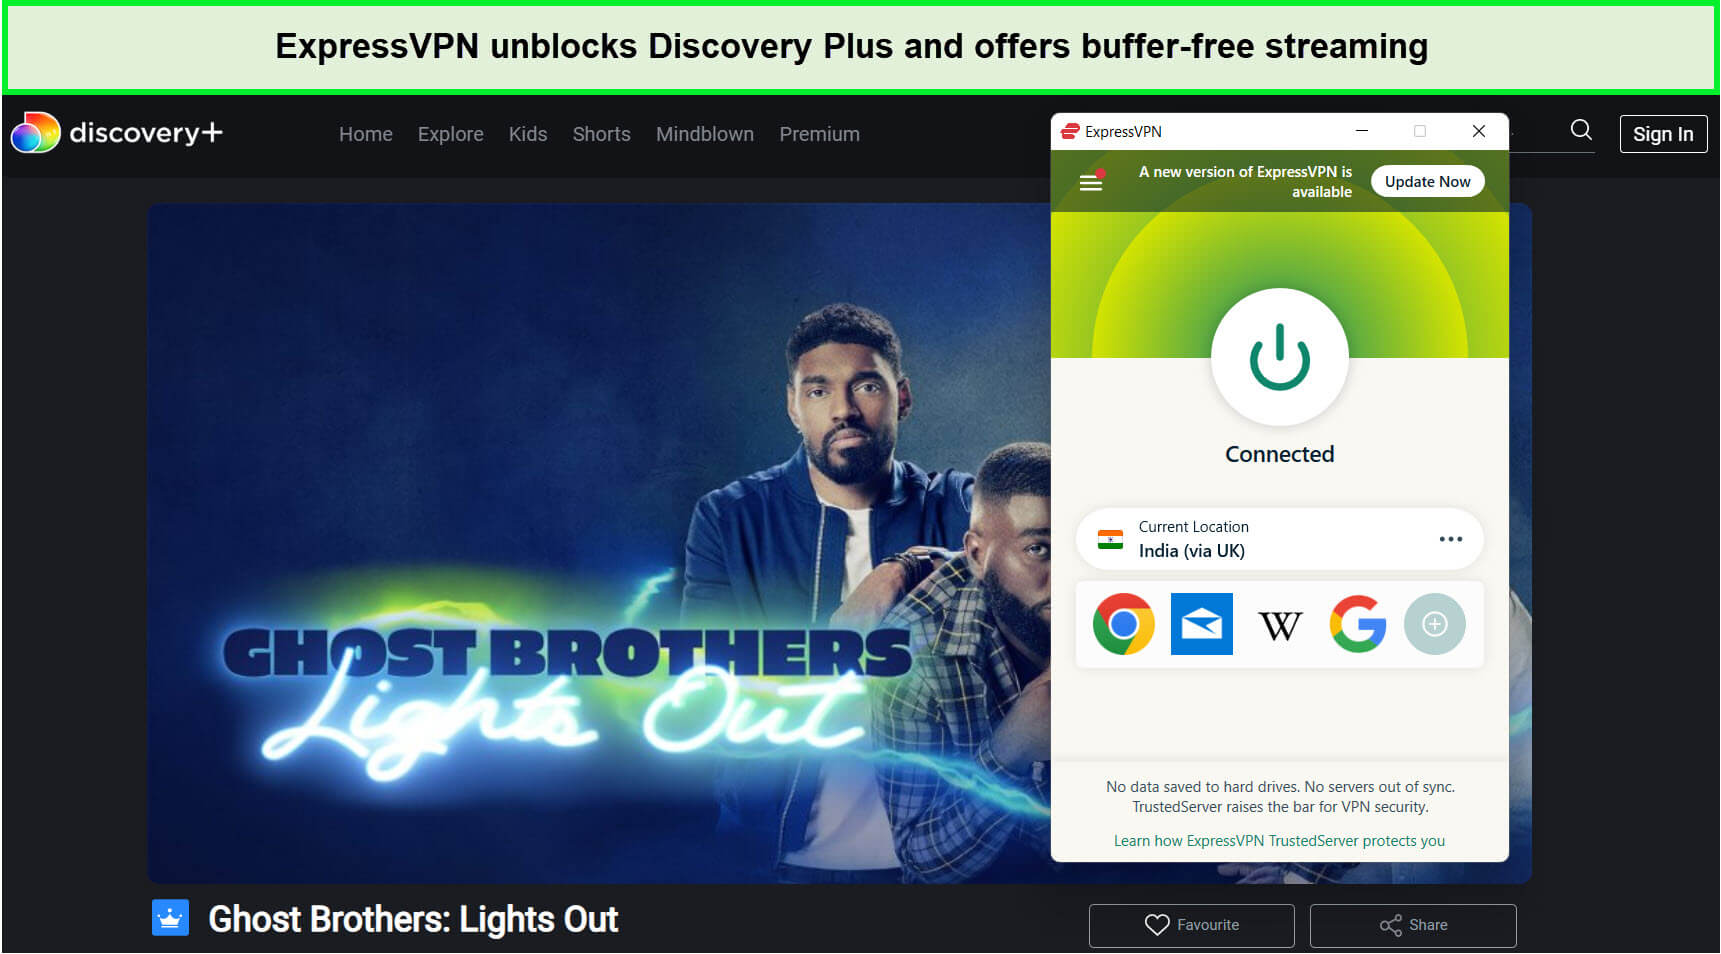 expressvpn-unblocks-ghost-brothers-on-discovery-plus